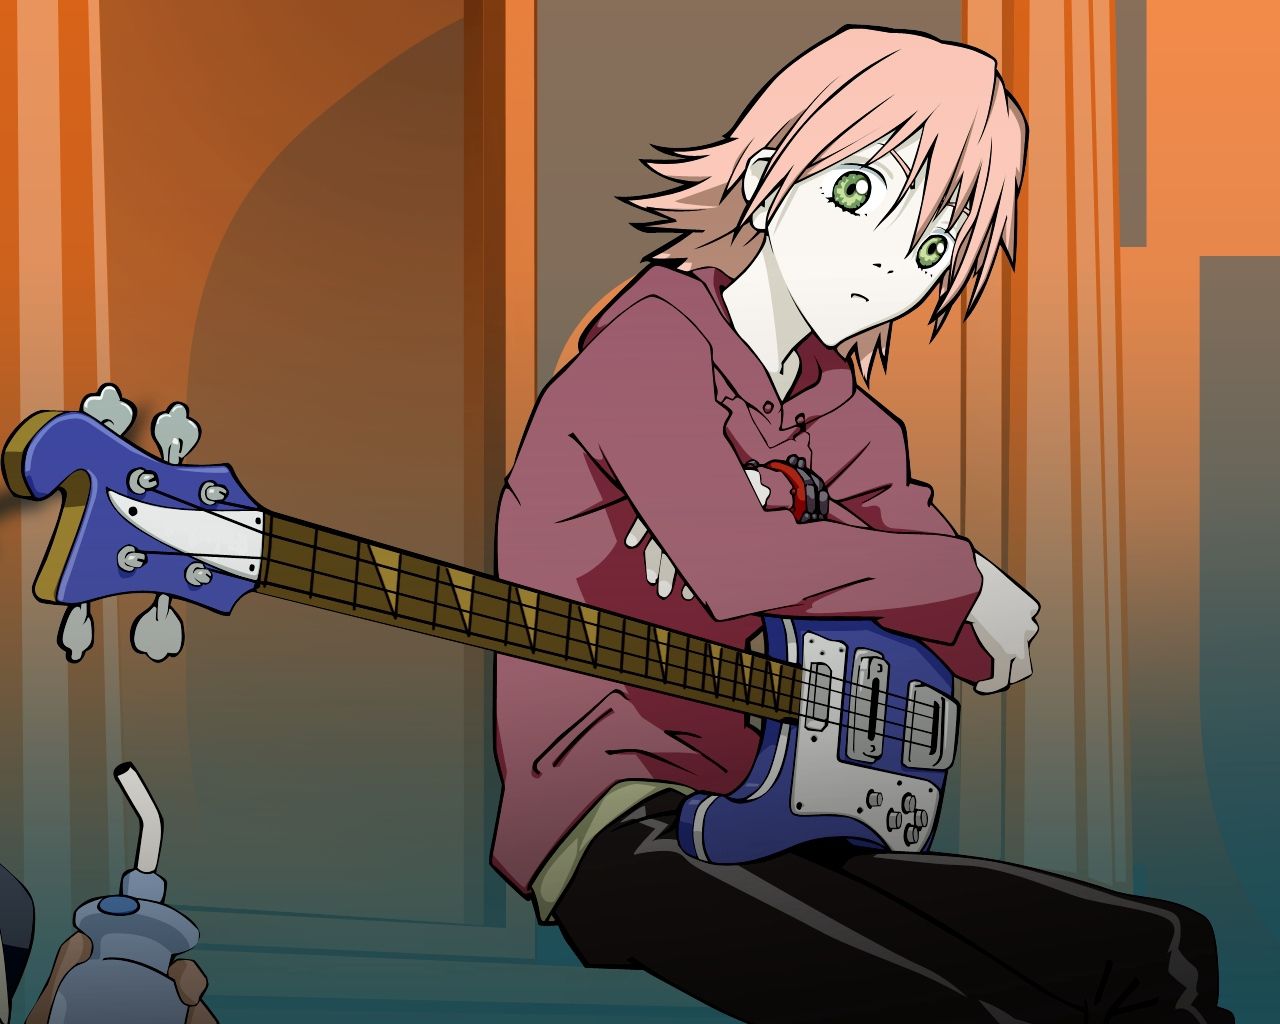 Download wallpaper 1280x1024 anime, guy, thought, guitar, look HD